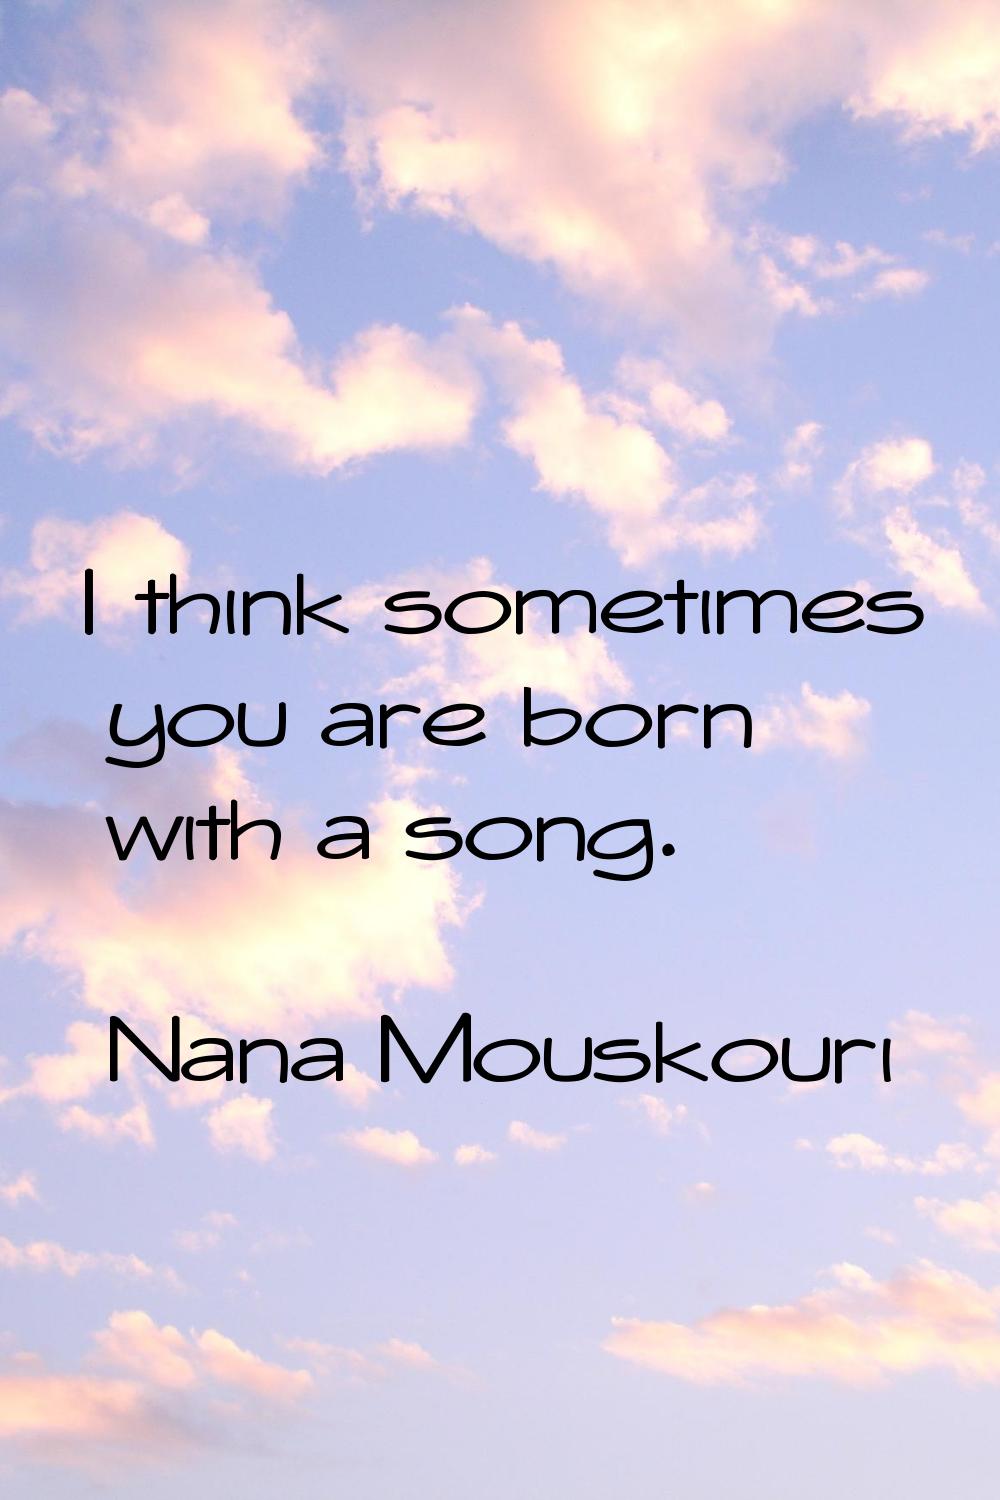 I think sometimes you are born with a song.